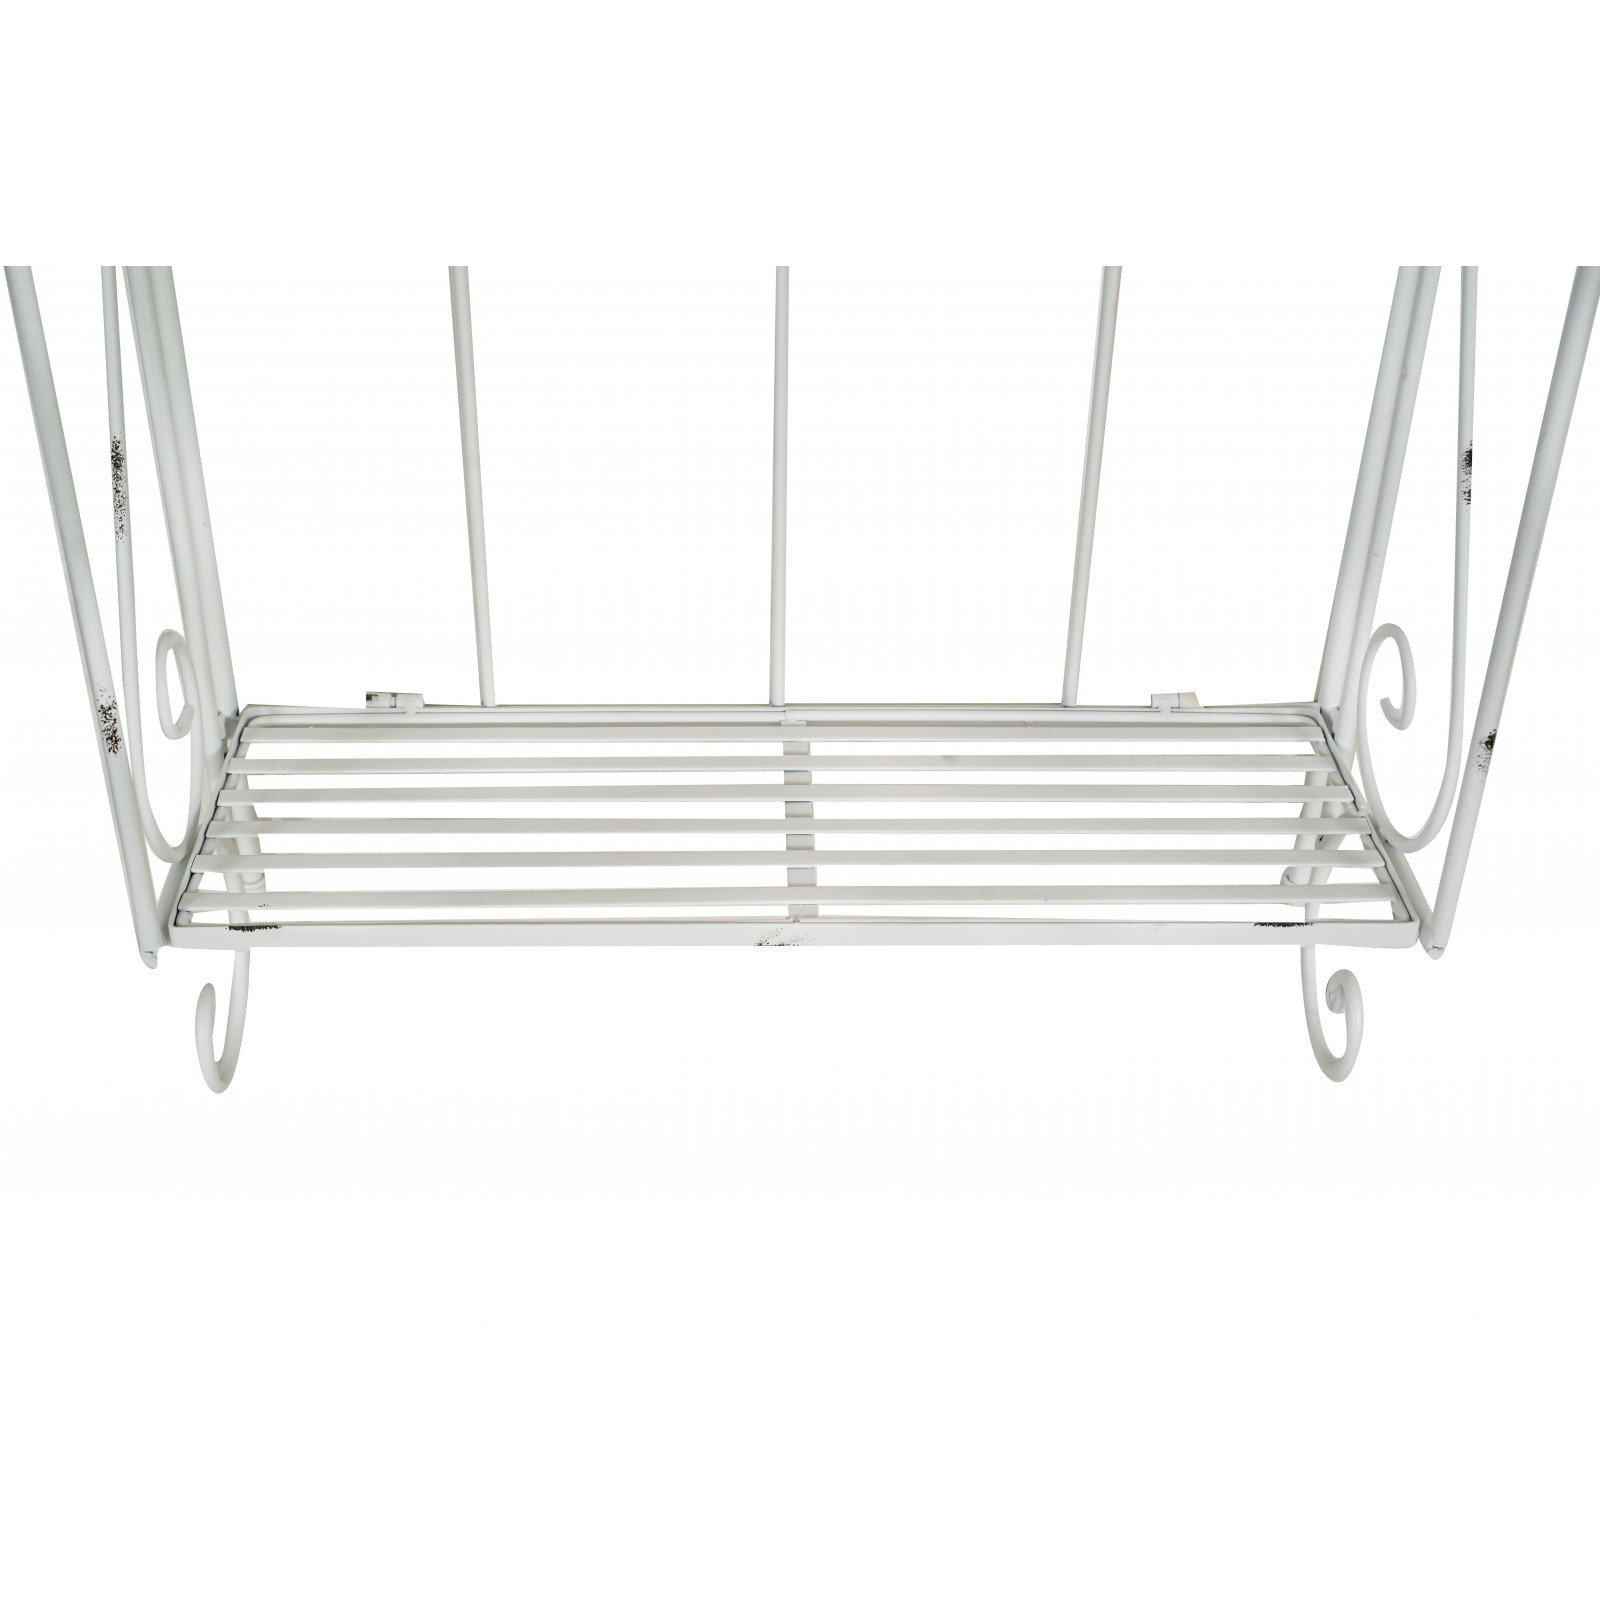 3 Arms Metal Towel Rack Stand Holder Le Bain White Old Finish 